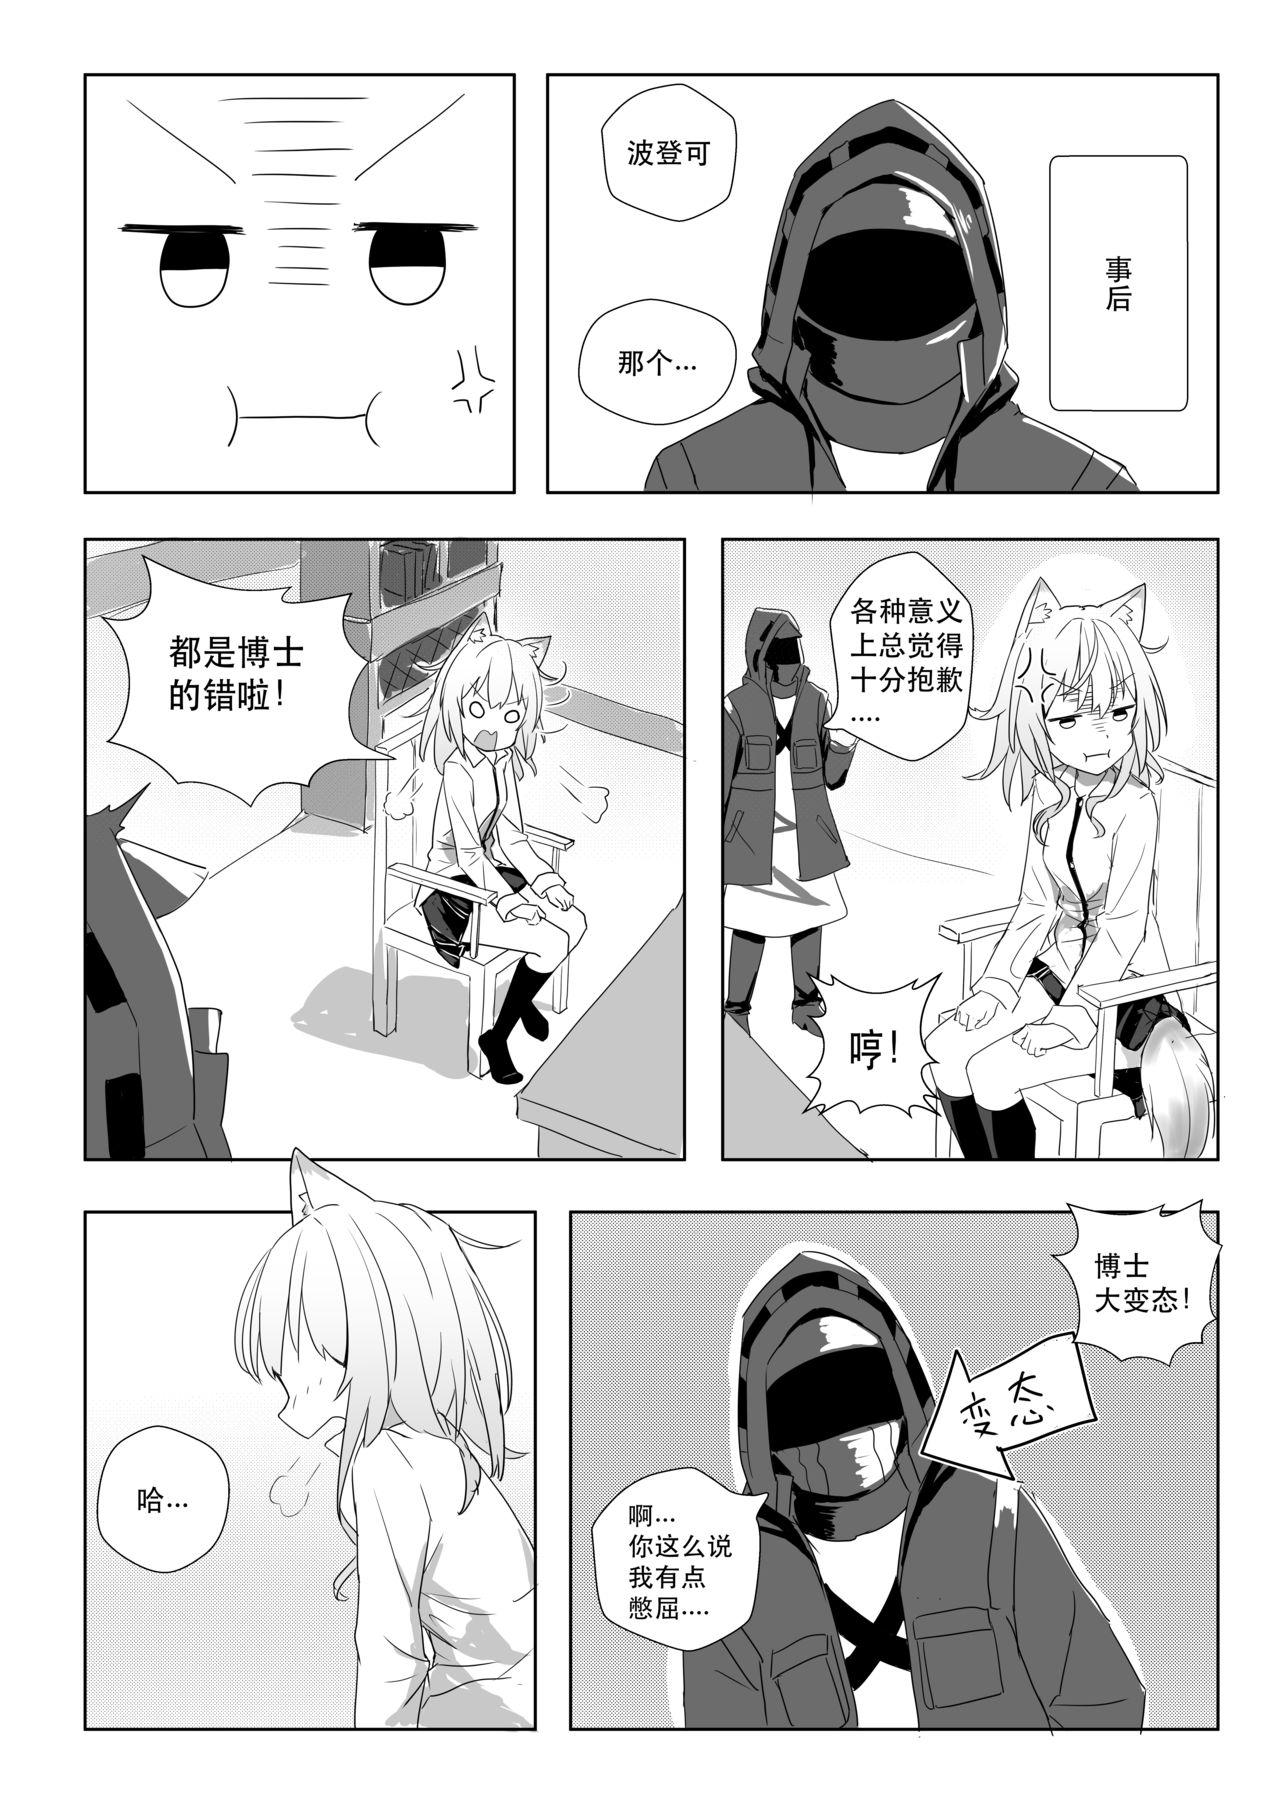 Porn Blow Jobs 发情的狗狗波登可 - Arknights Screaming - Page 9